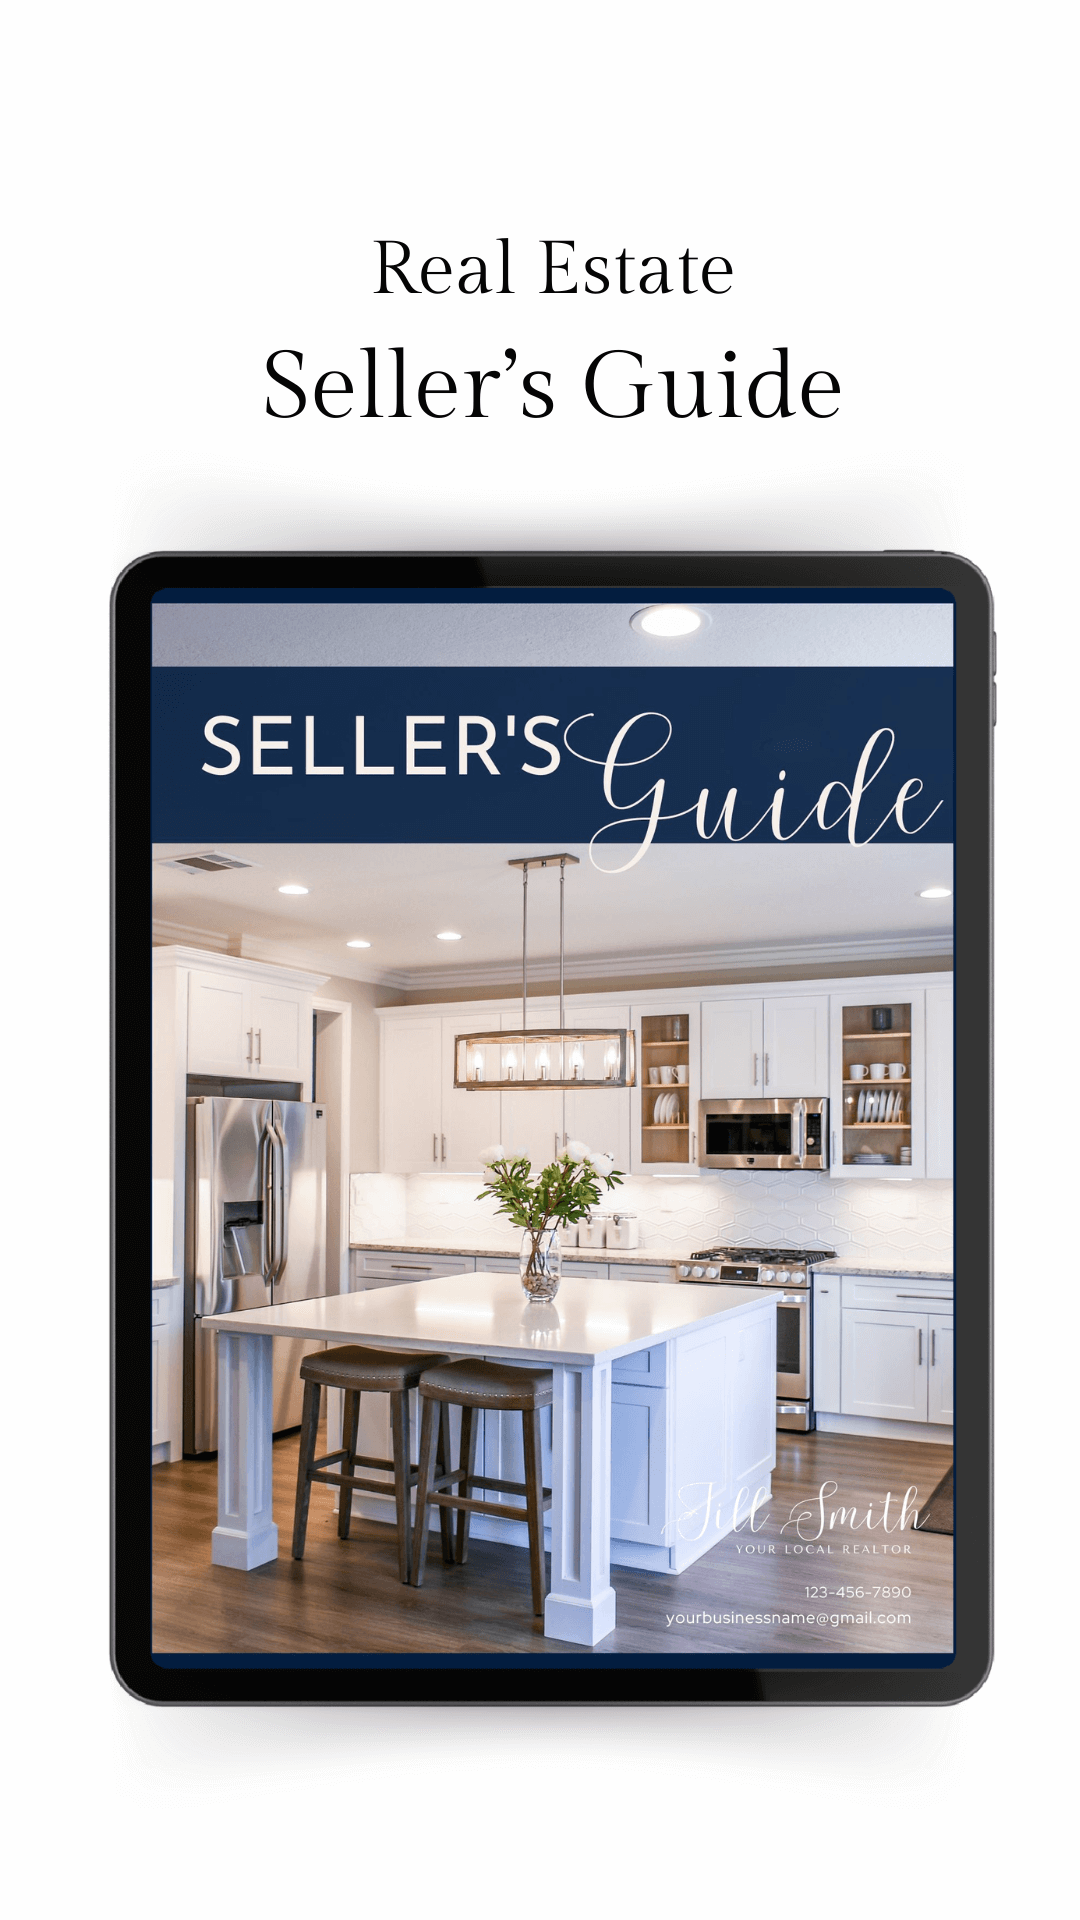 the social stager_real estate buyer's guide_lead magnet